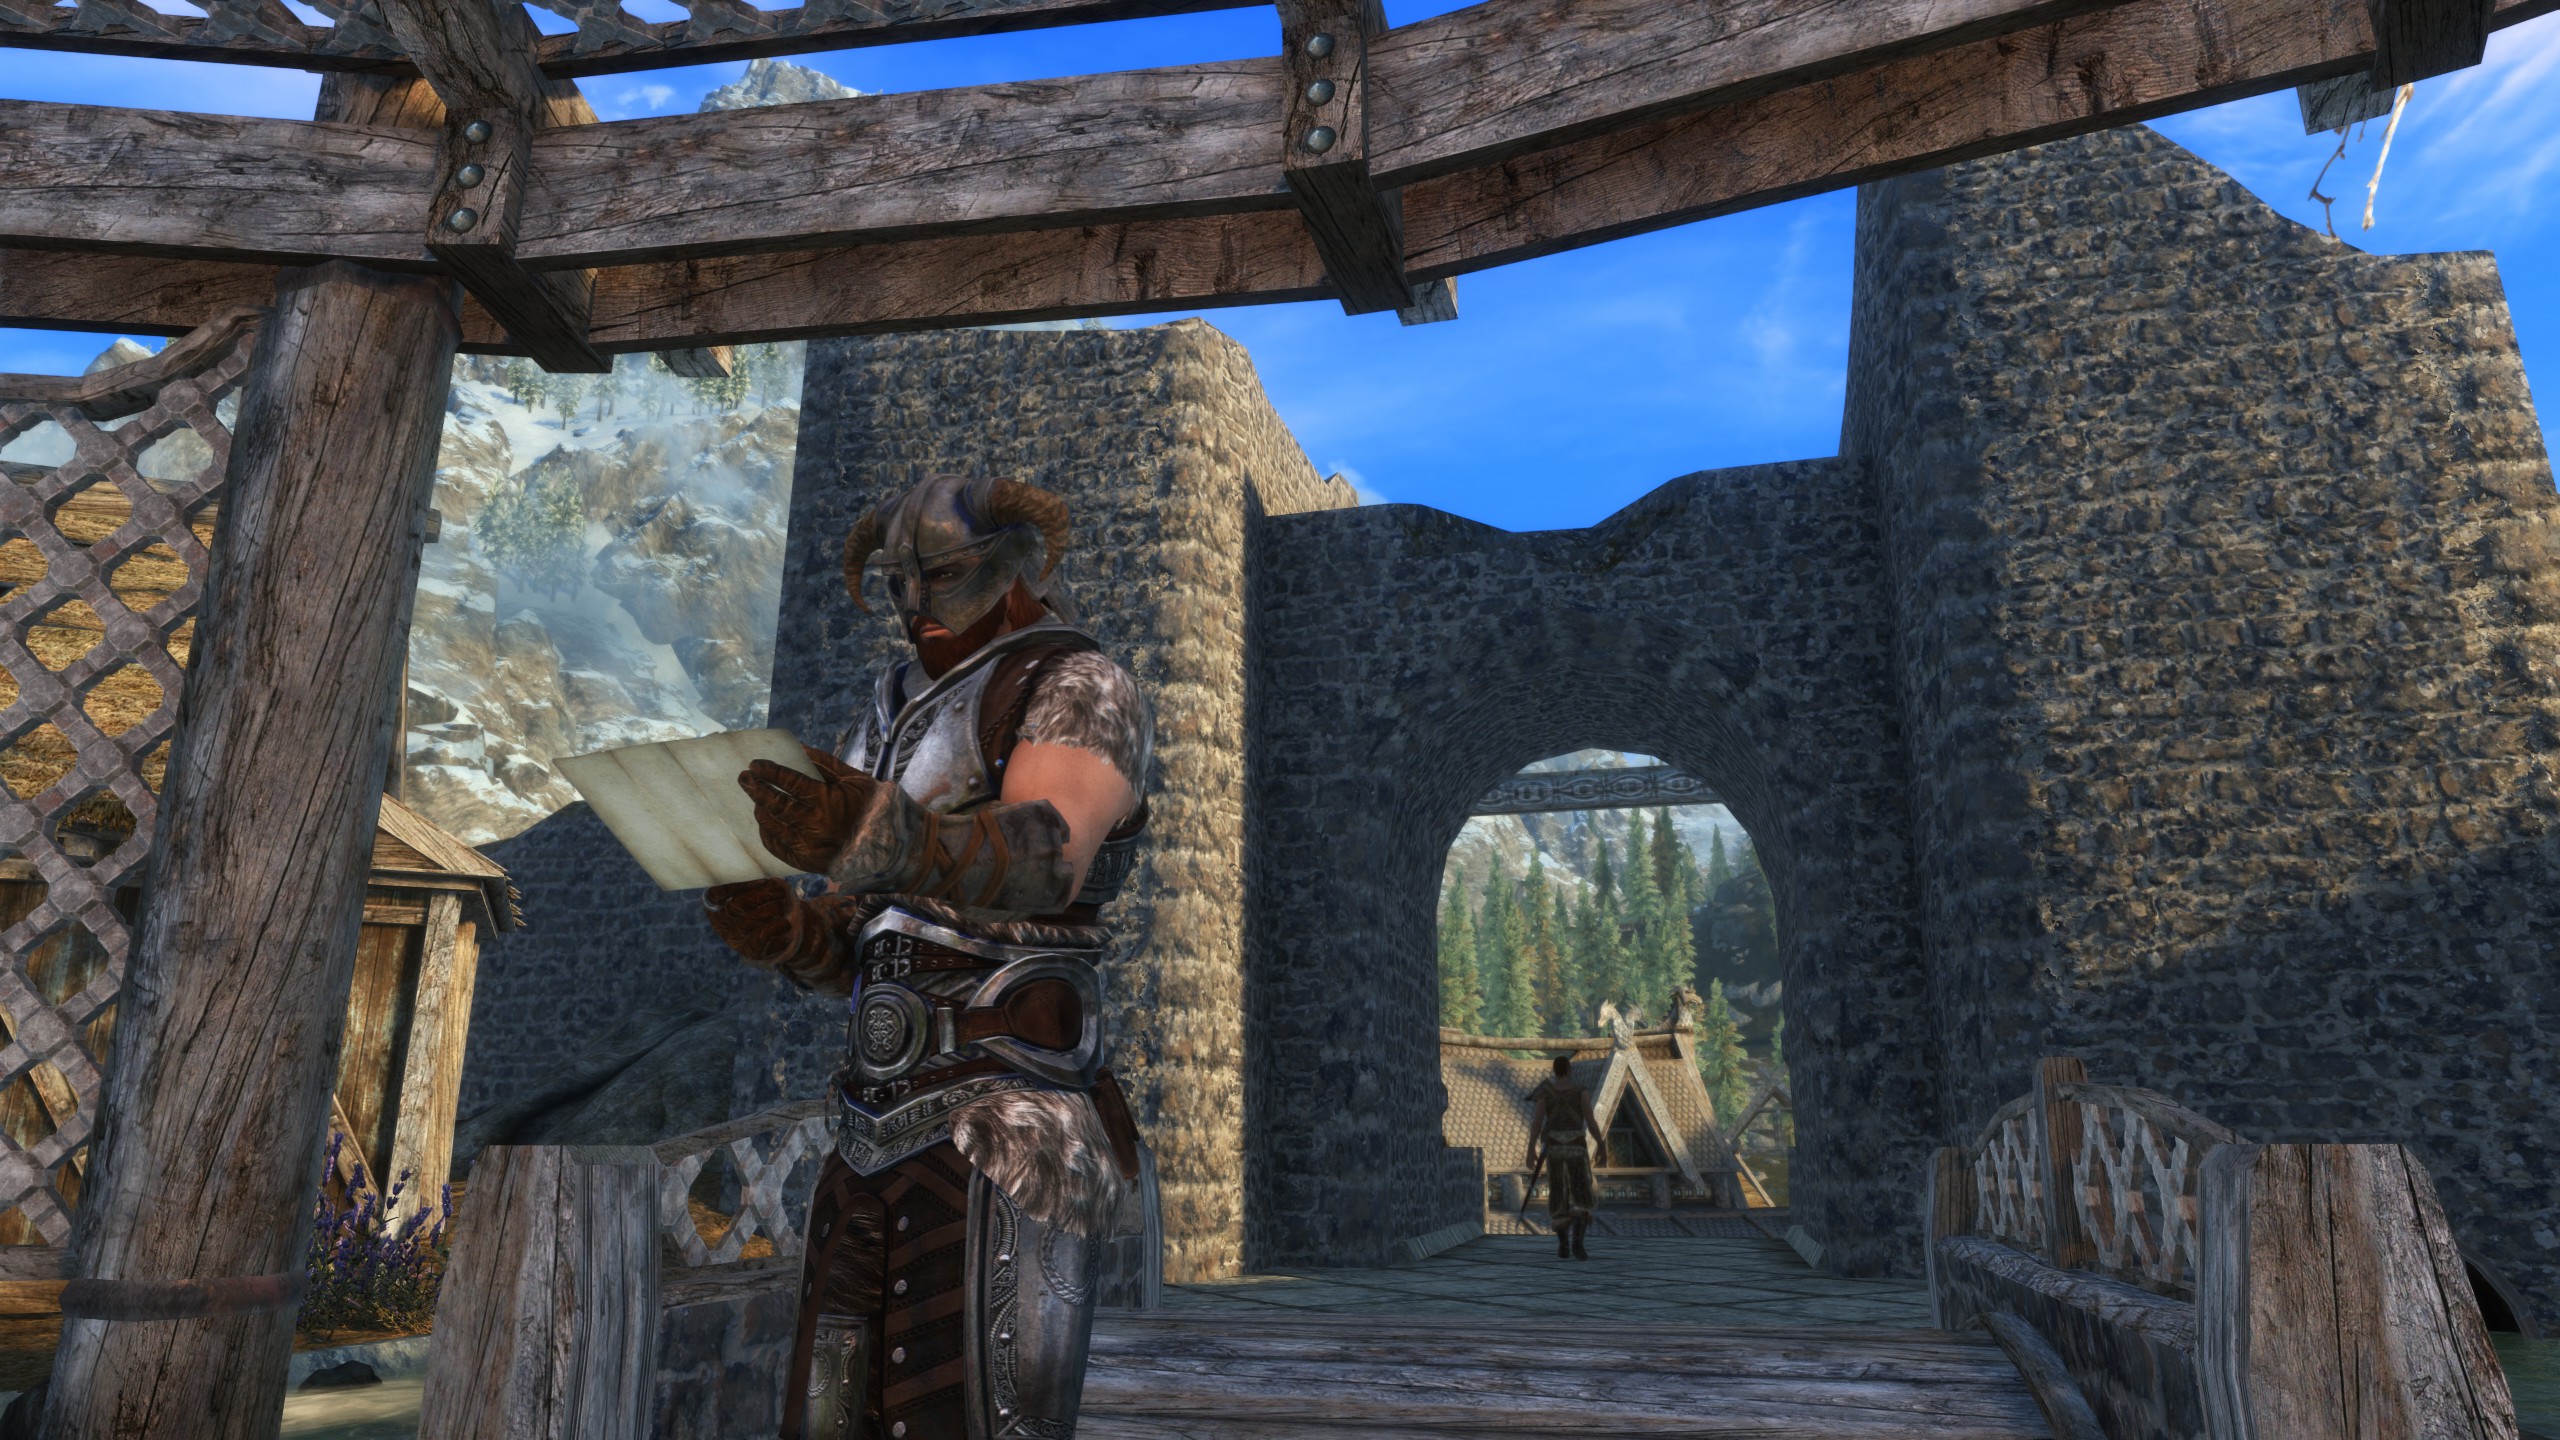  In RPGs, I prefer reading books to slaying dragons 